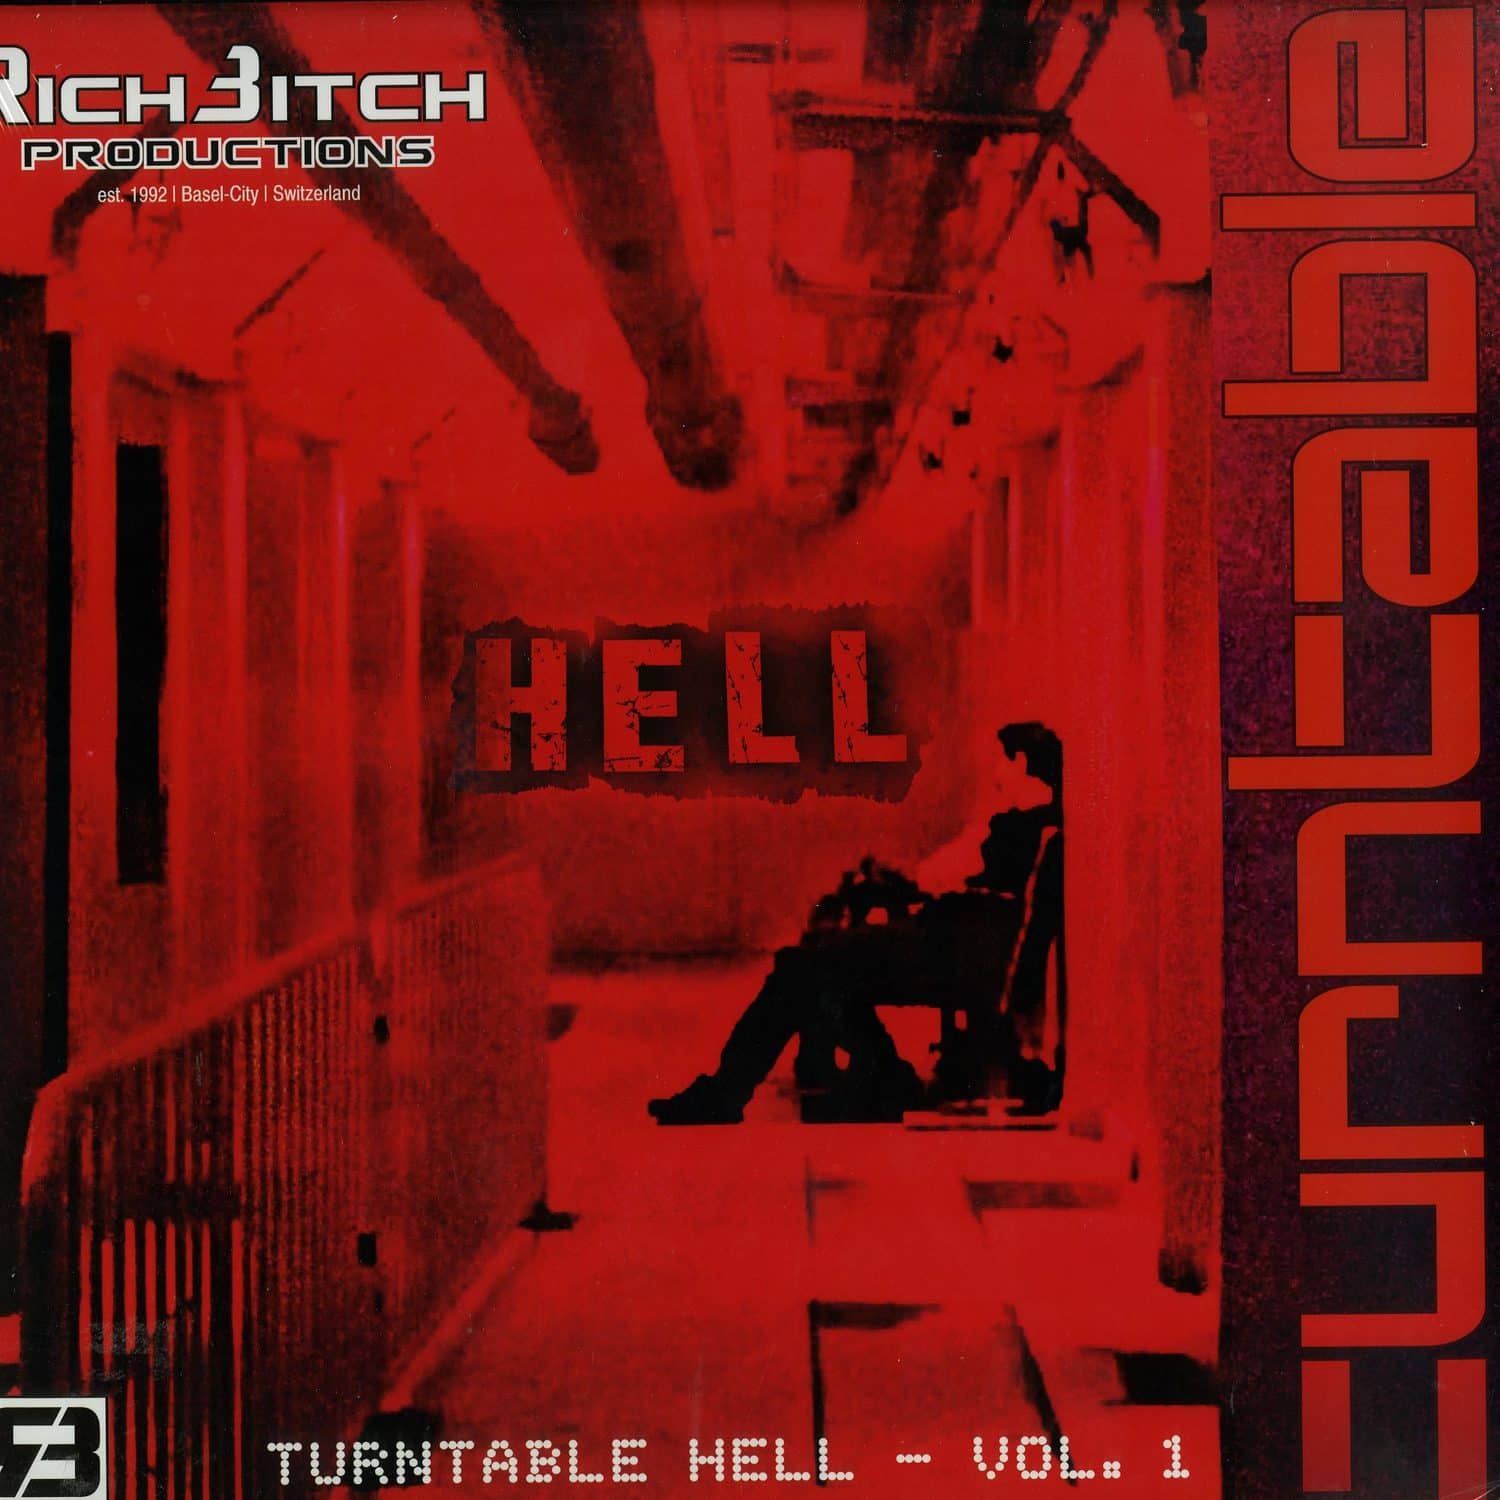 RichBitch - TURNTABLE HELL VOL. 1